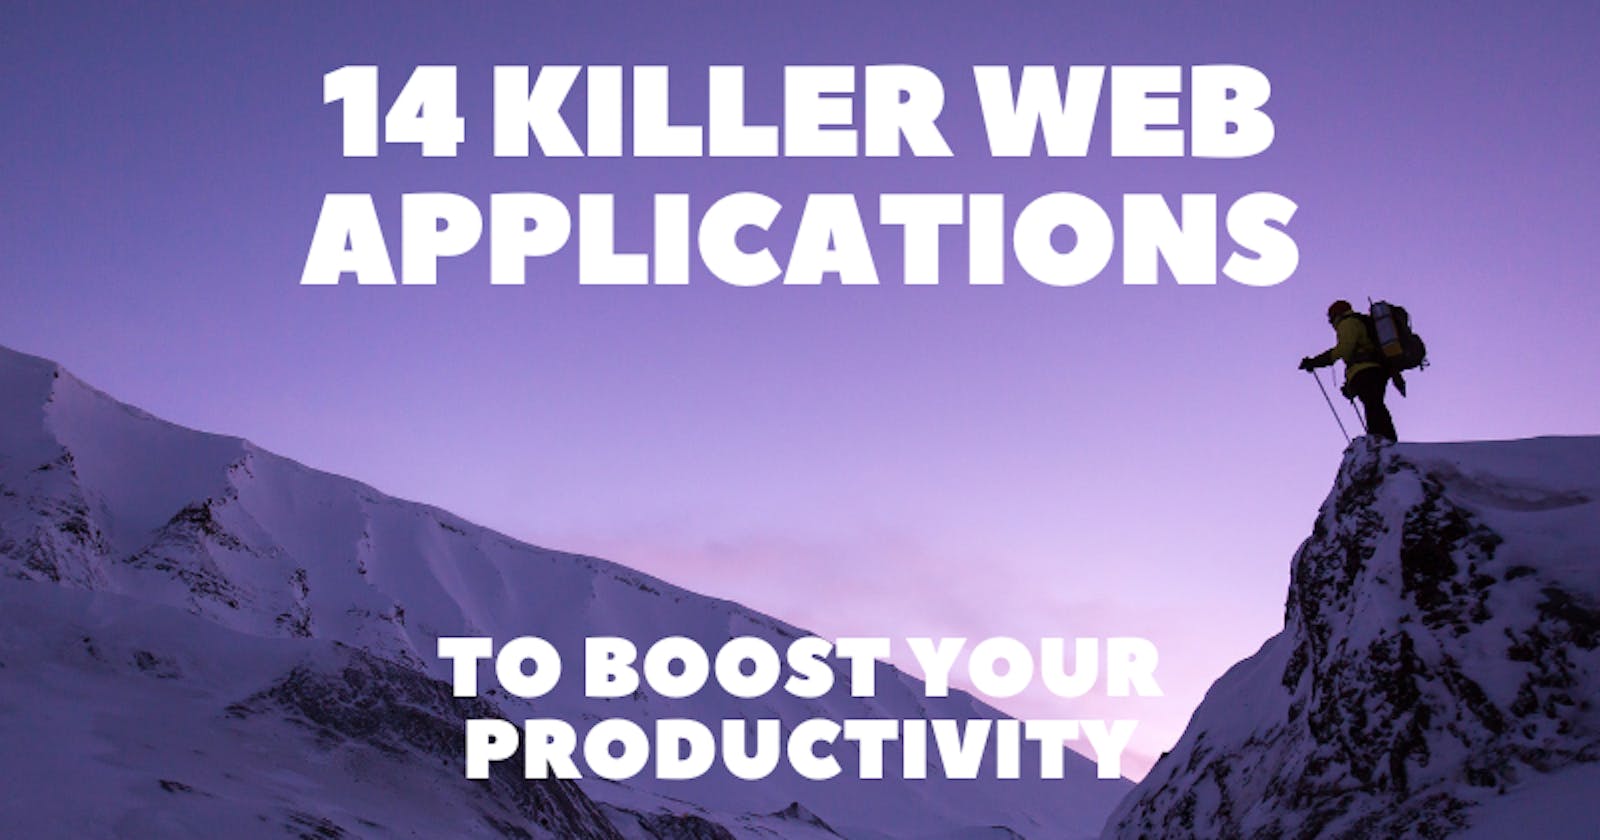 14 Killer Web Applications to Boost Your Productivity 🚀💯